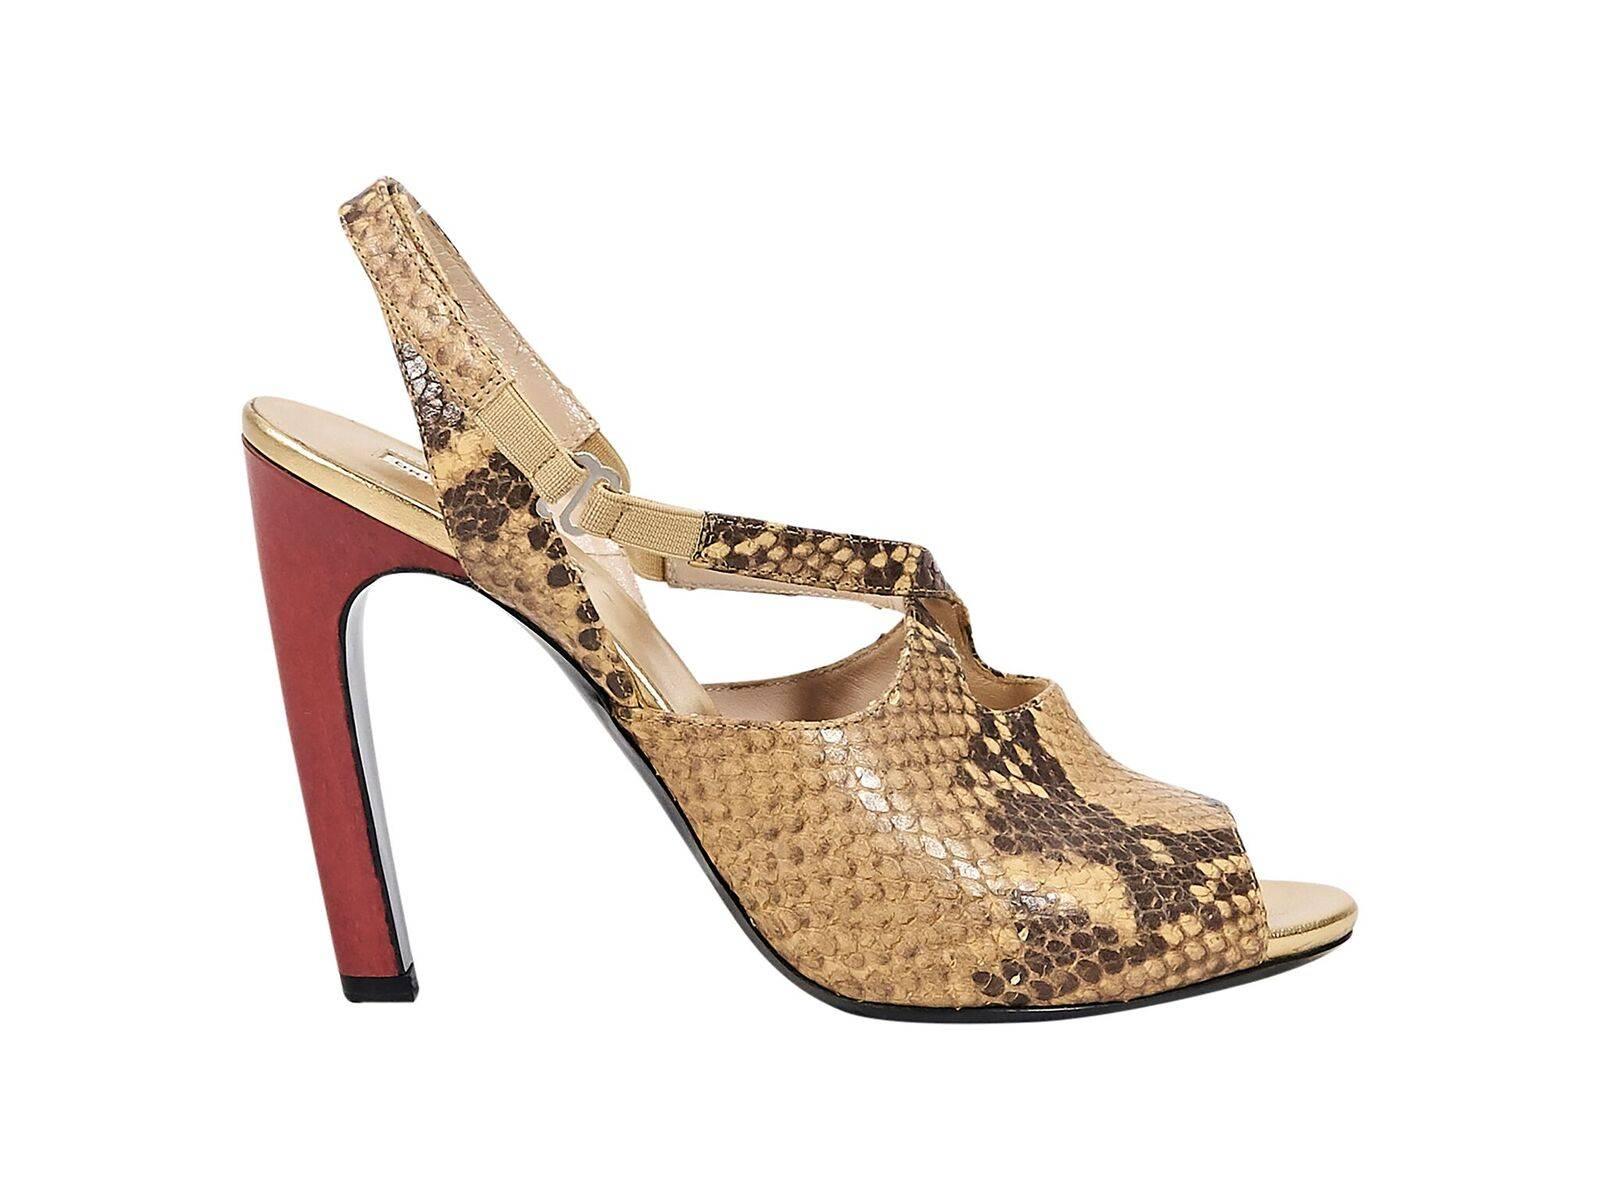 Product details:  Tan snakeskin pumps by Dries van Noten.  Slingback strap with inset elastic panels.  Peep toe.  Red heel.  Slip-on style.
Condition: Pre-owned. Very good.
Est. Retail $898